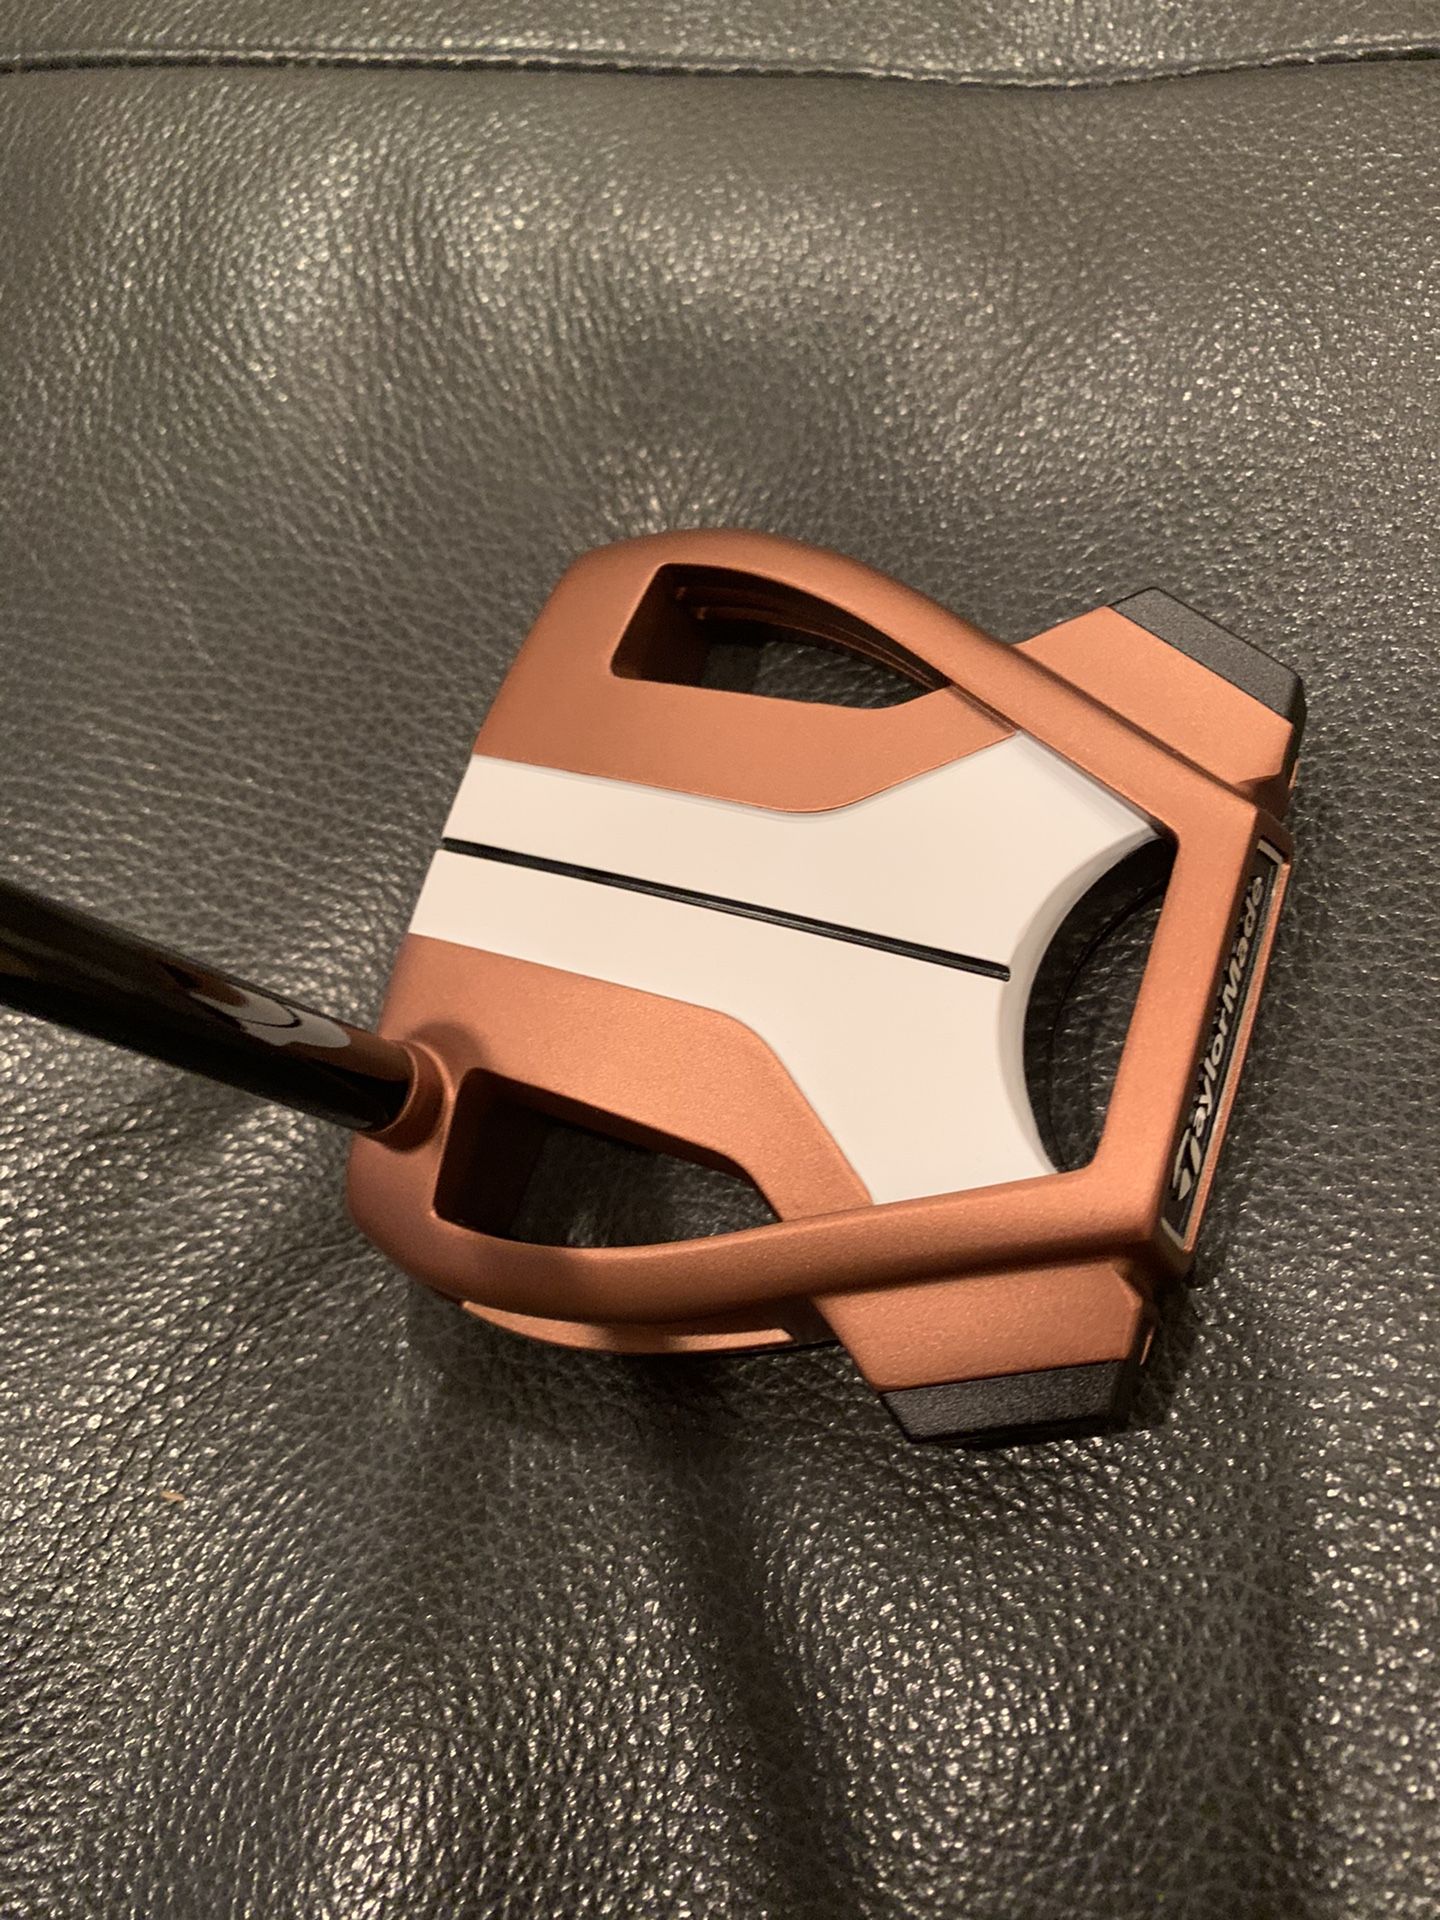 Brand New Taylormade Spider X Putter